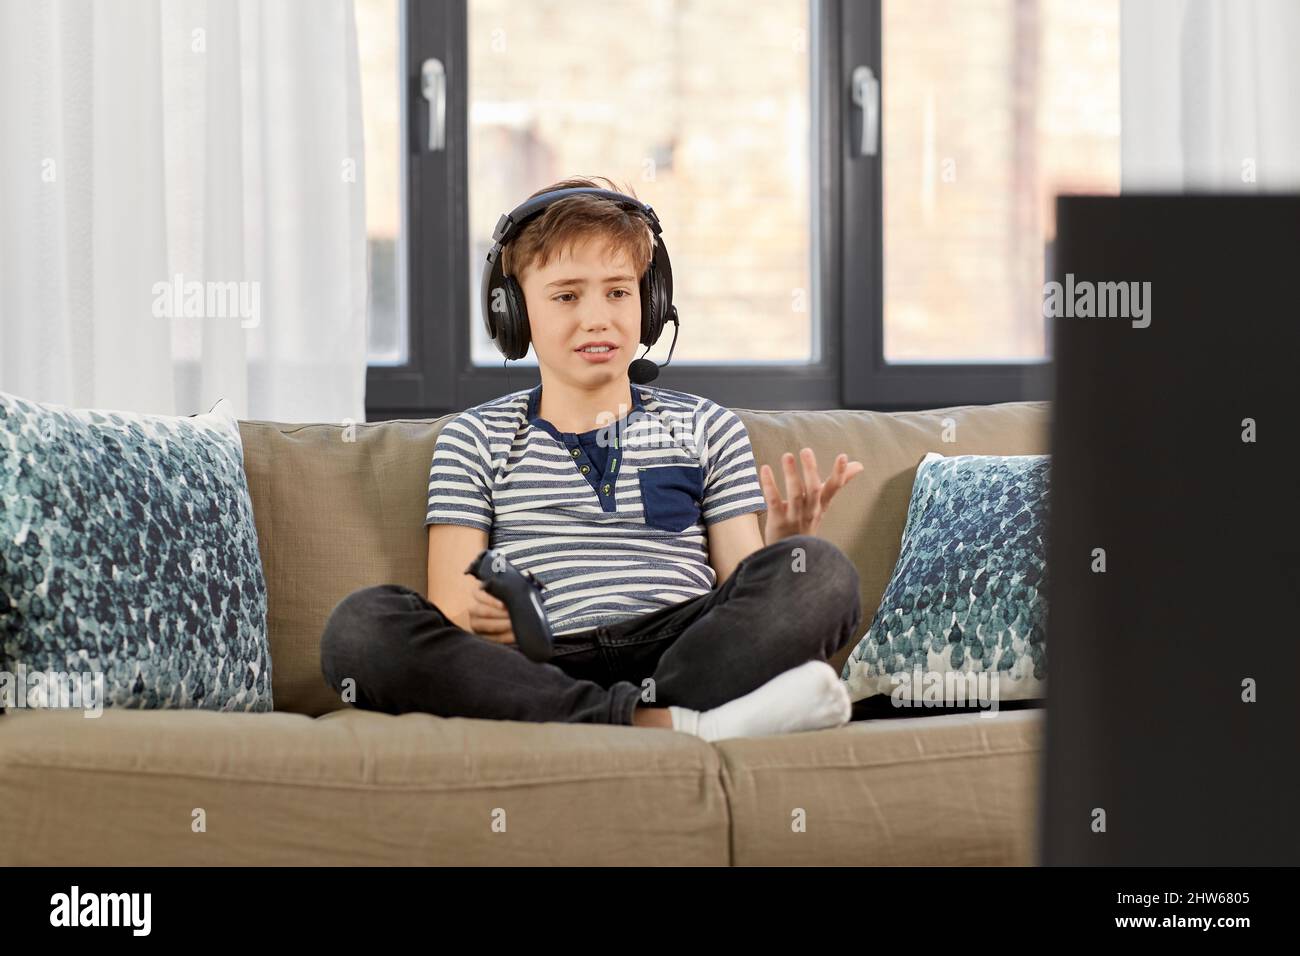 upset boy with gamepad playing video game at home Stock Photo